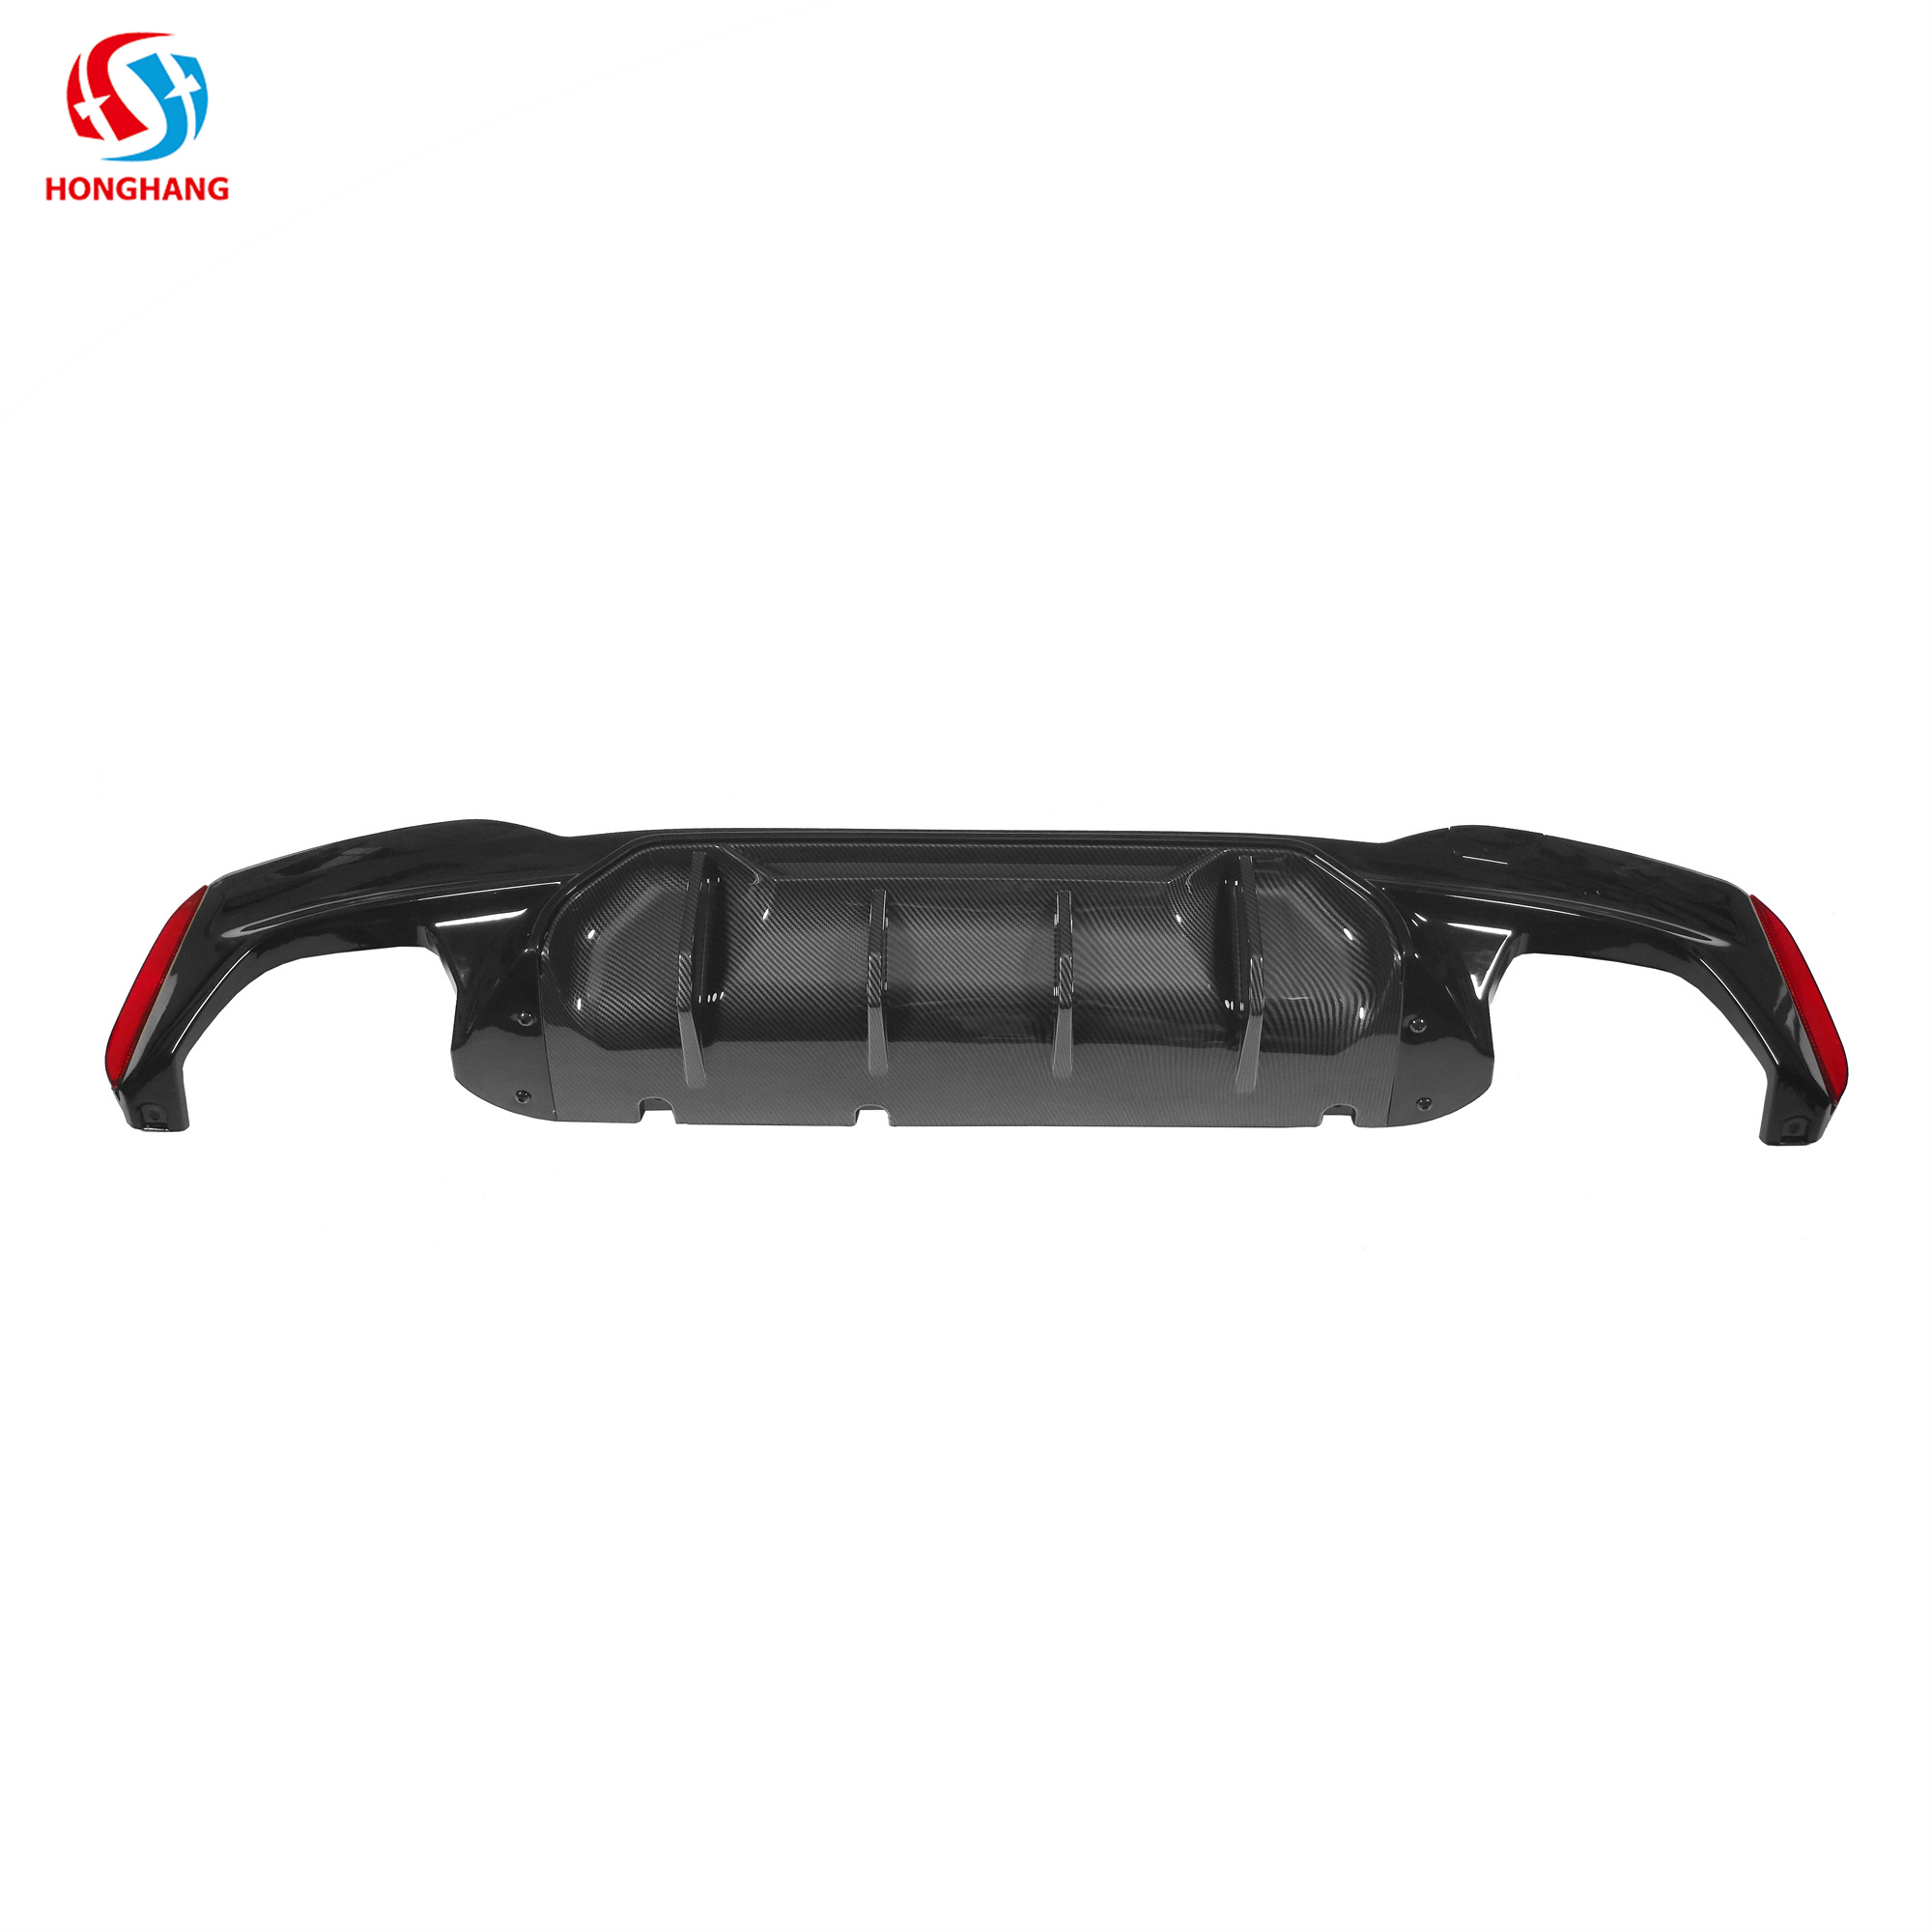 Competitive M5 Style Water Transfer Printing Rear Bumper Diffuser for Bmw 5 Series G30 2018+